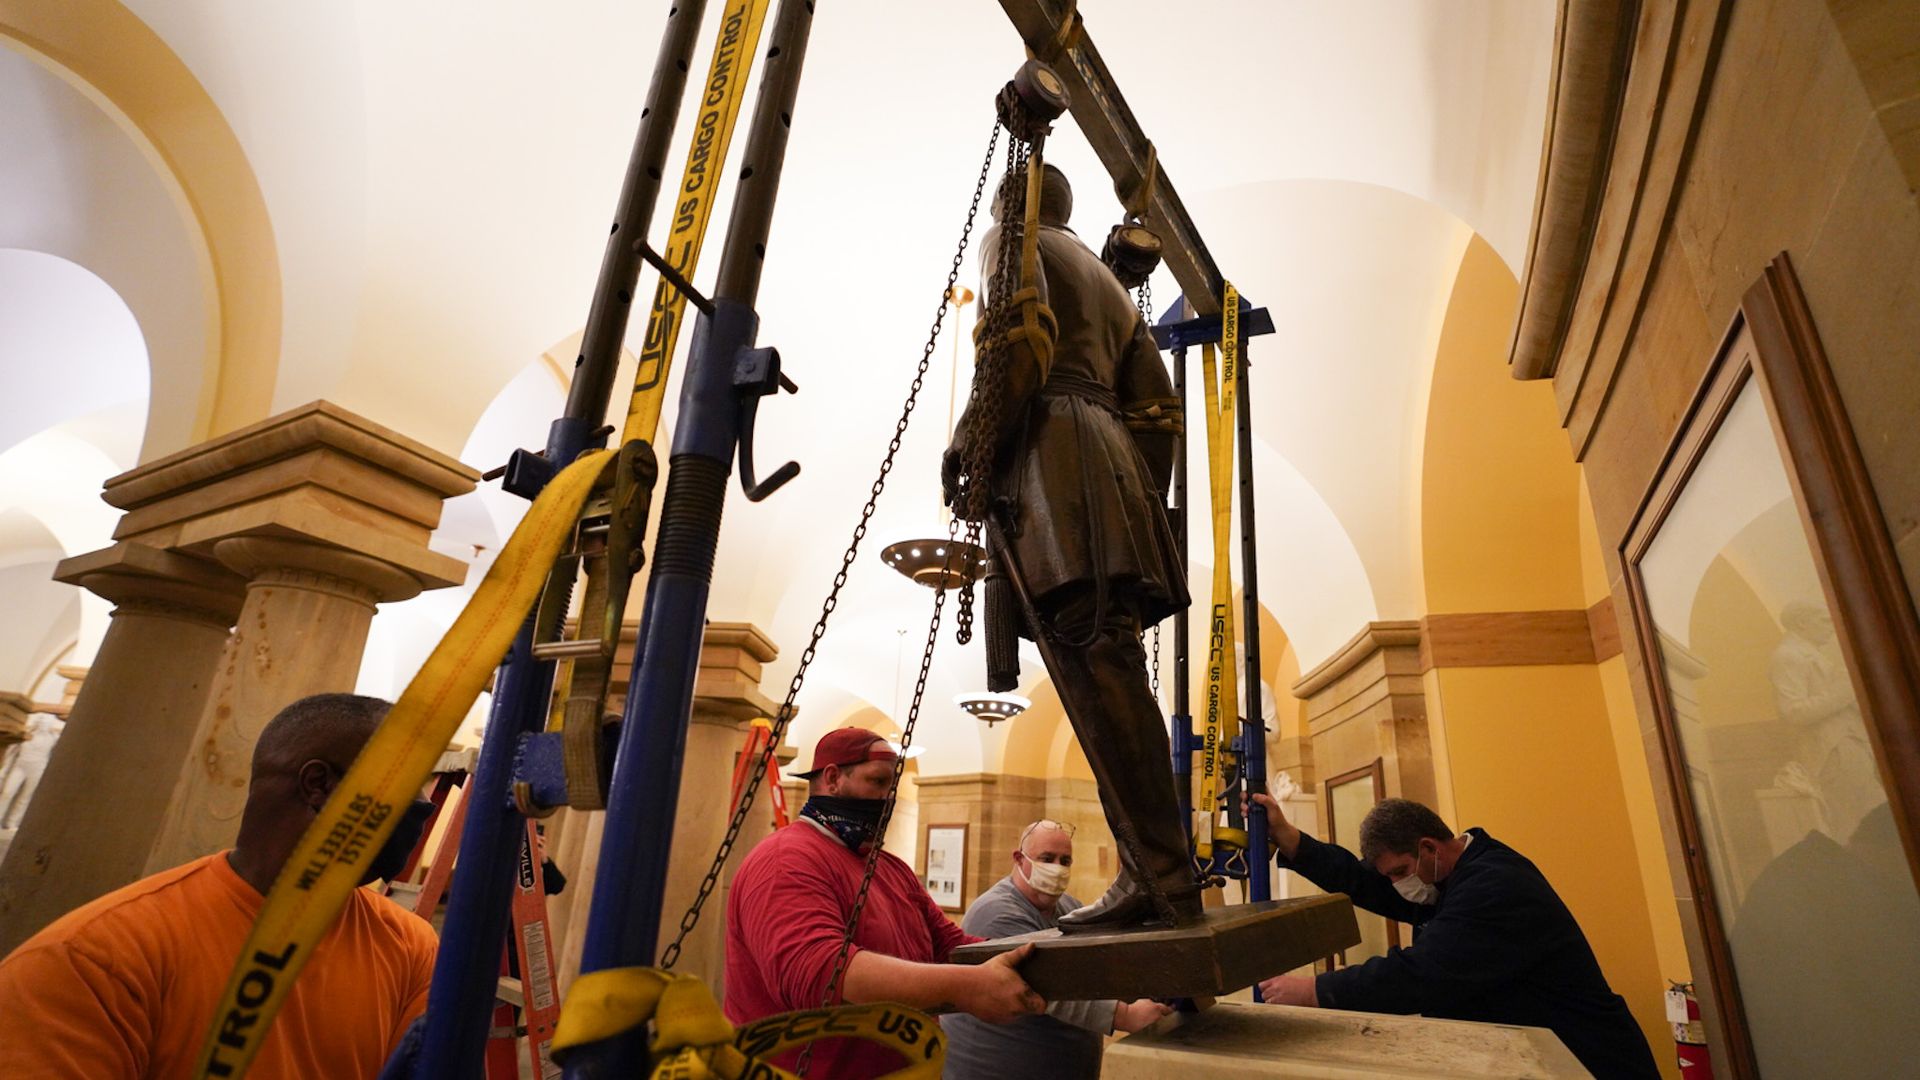 Robert E Lee Statue being removed.